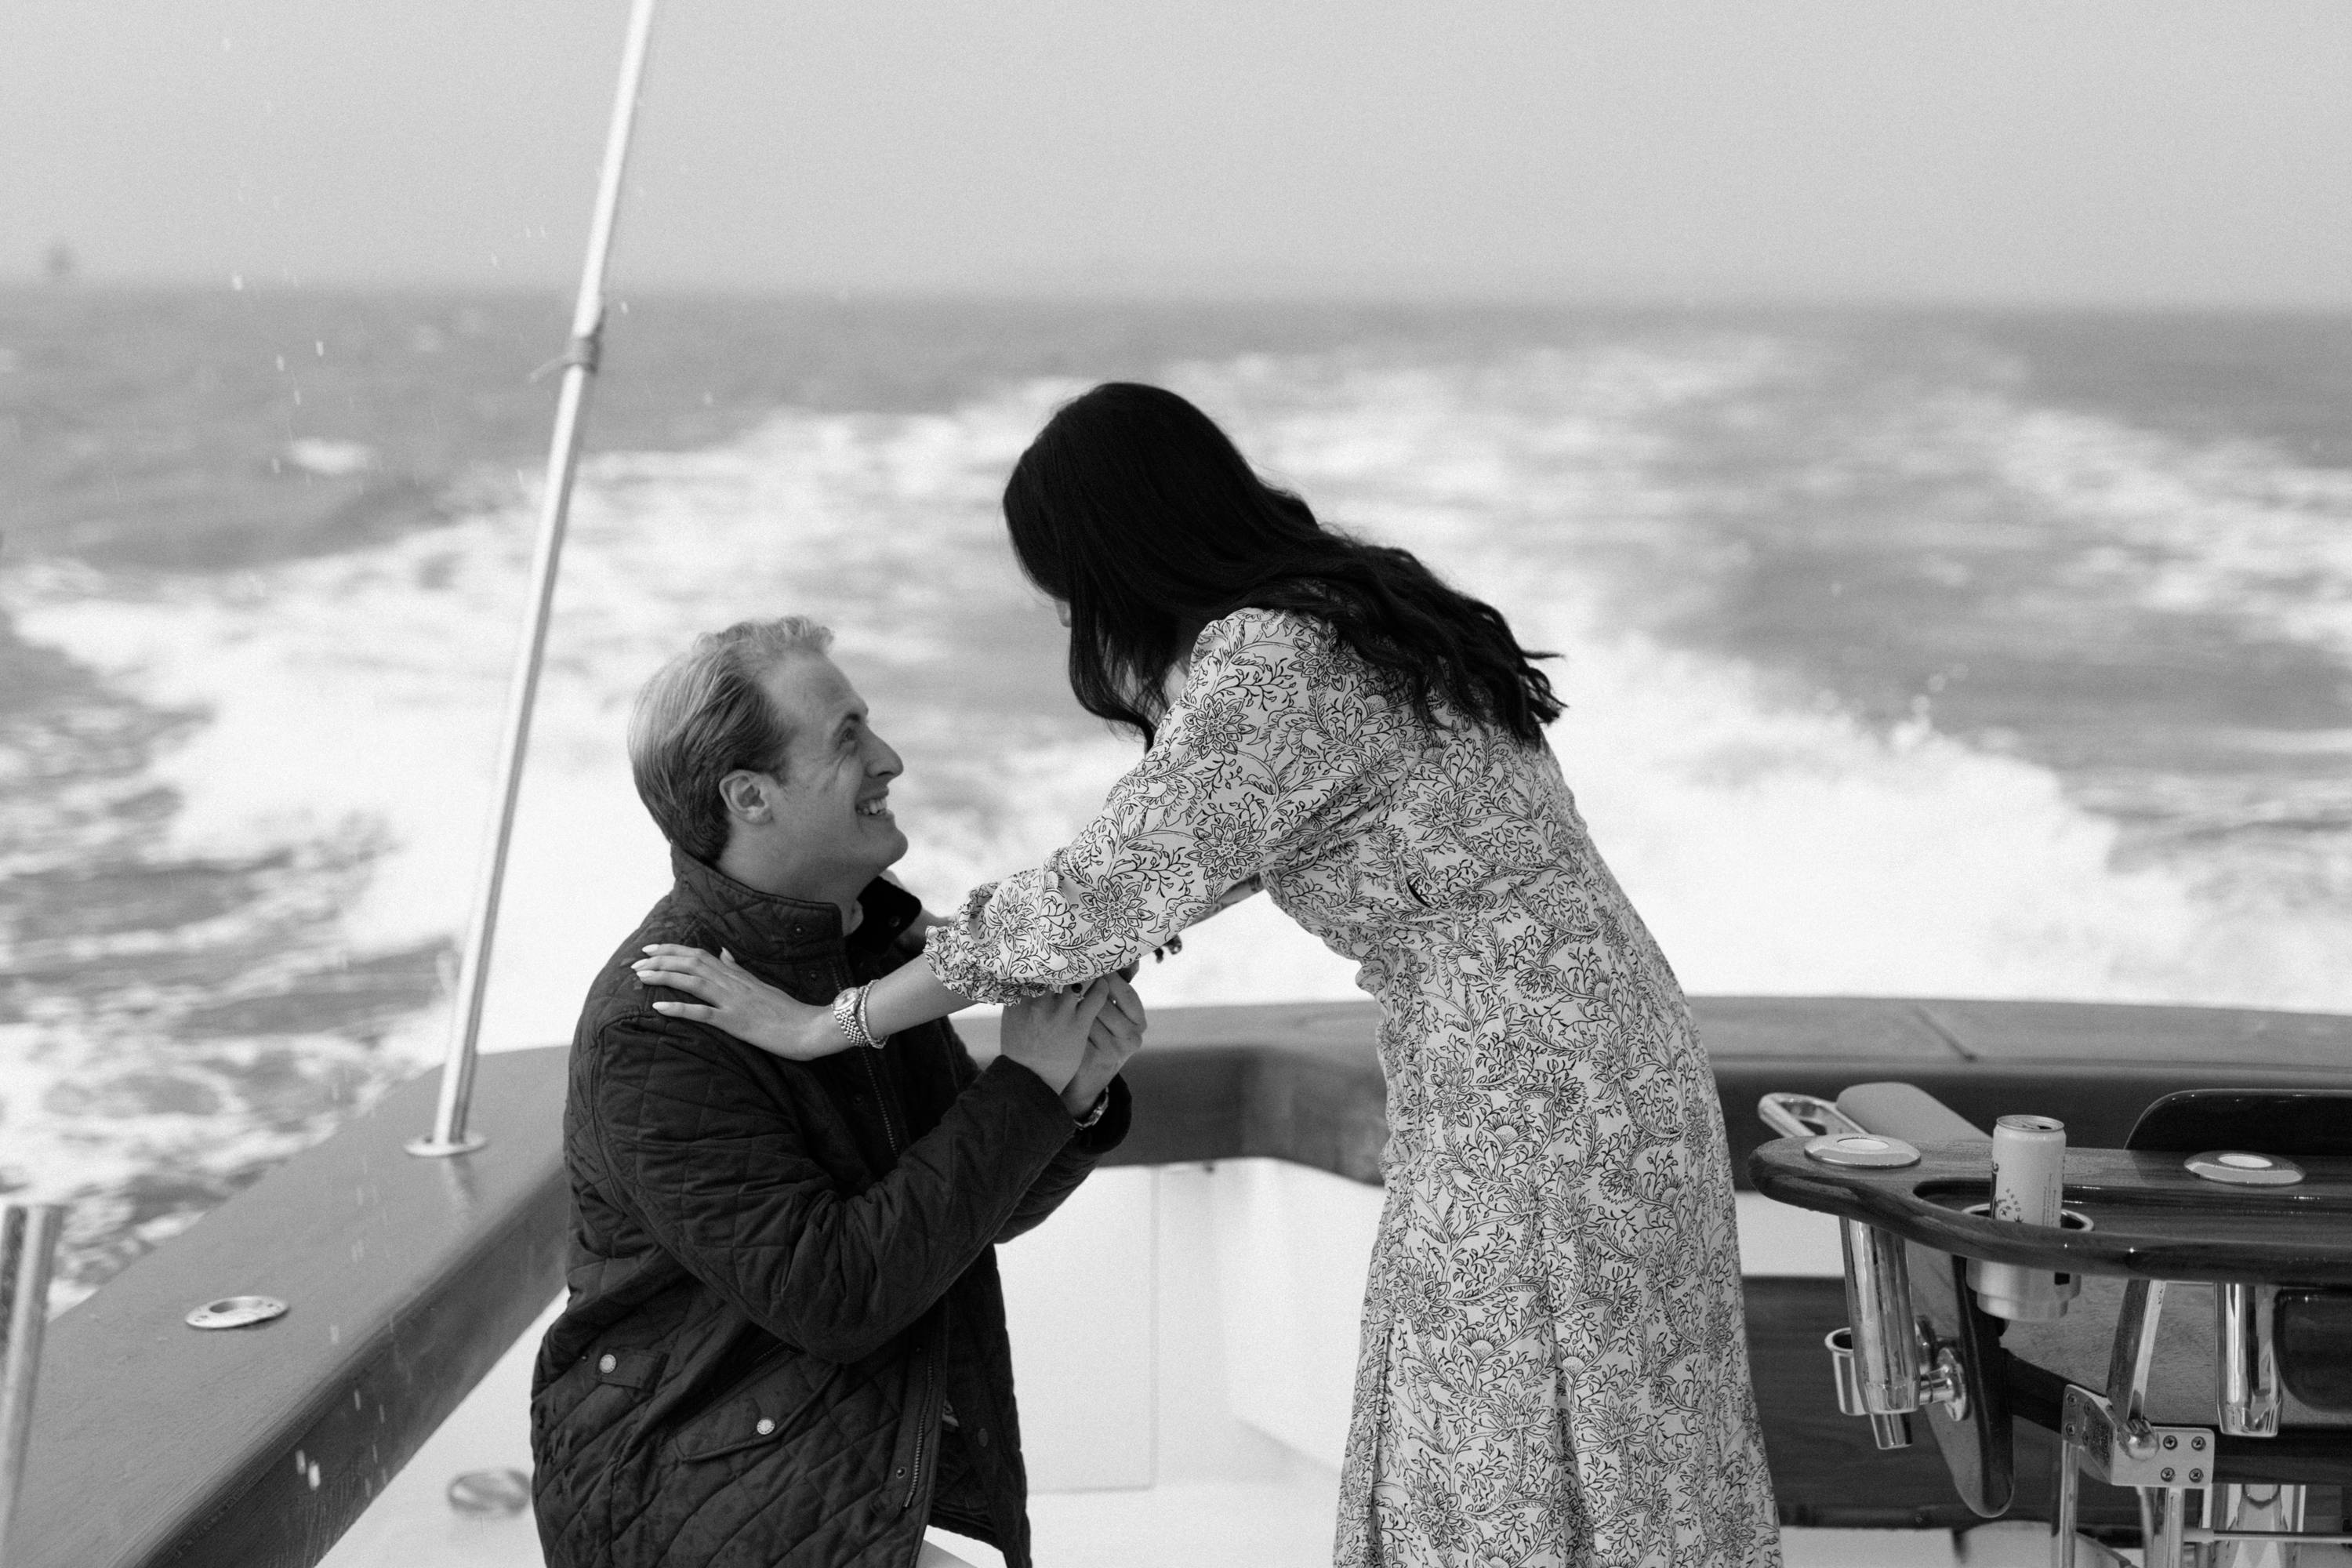 Chris kneeling to propose on the boat in black and white